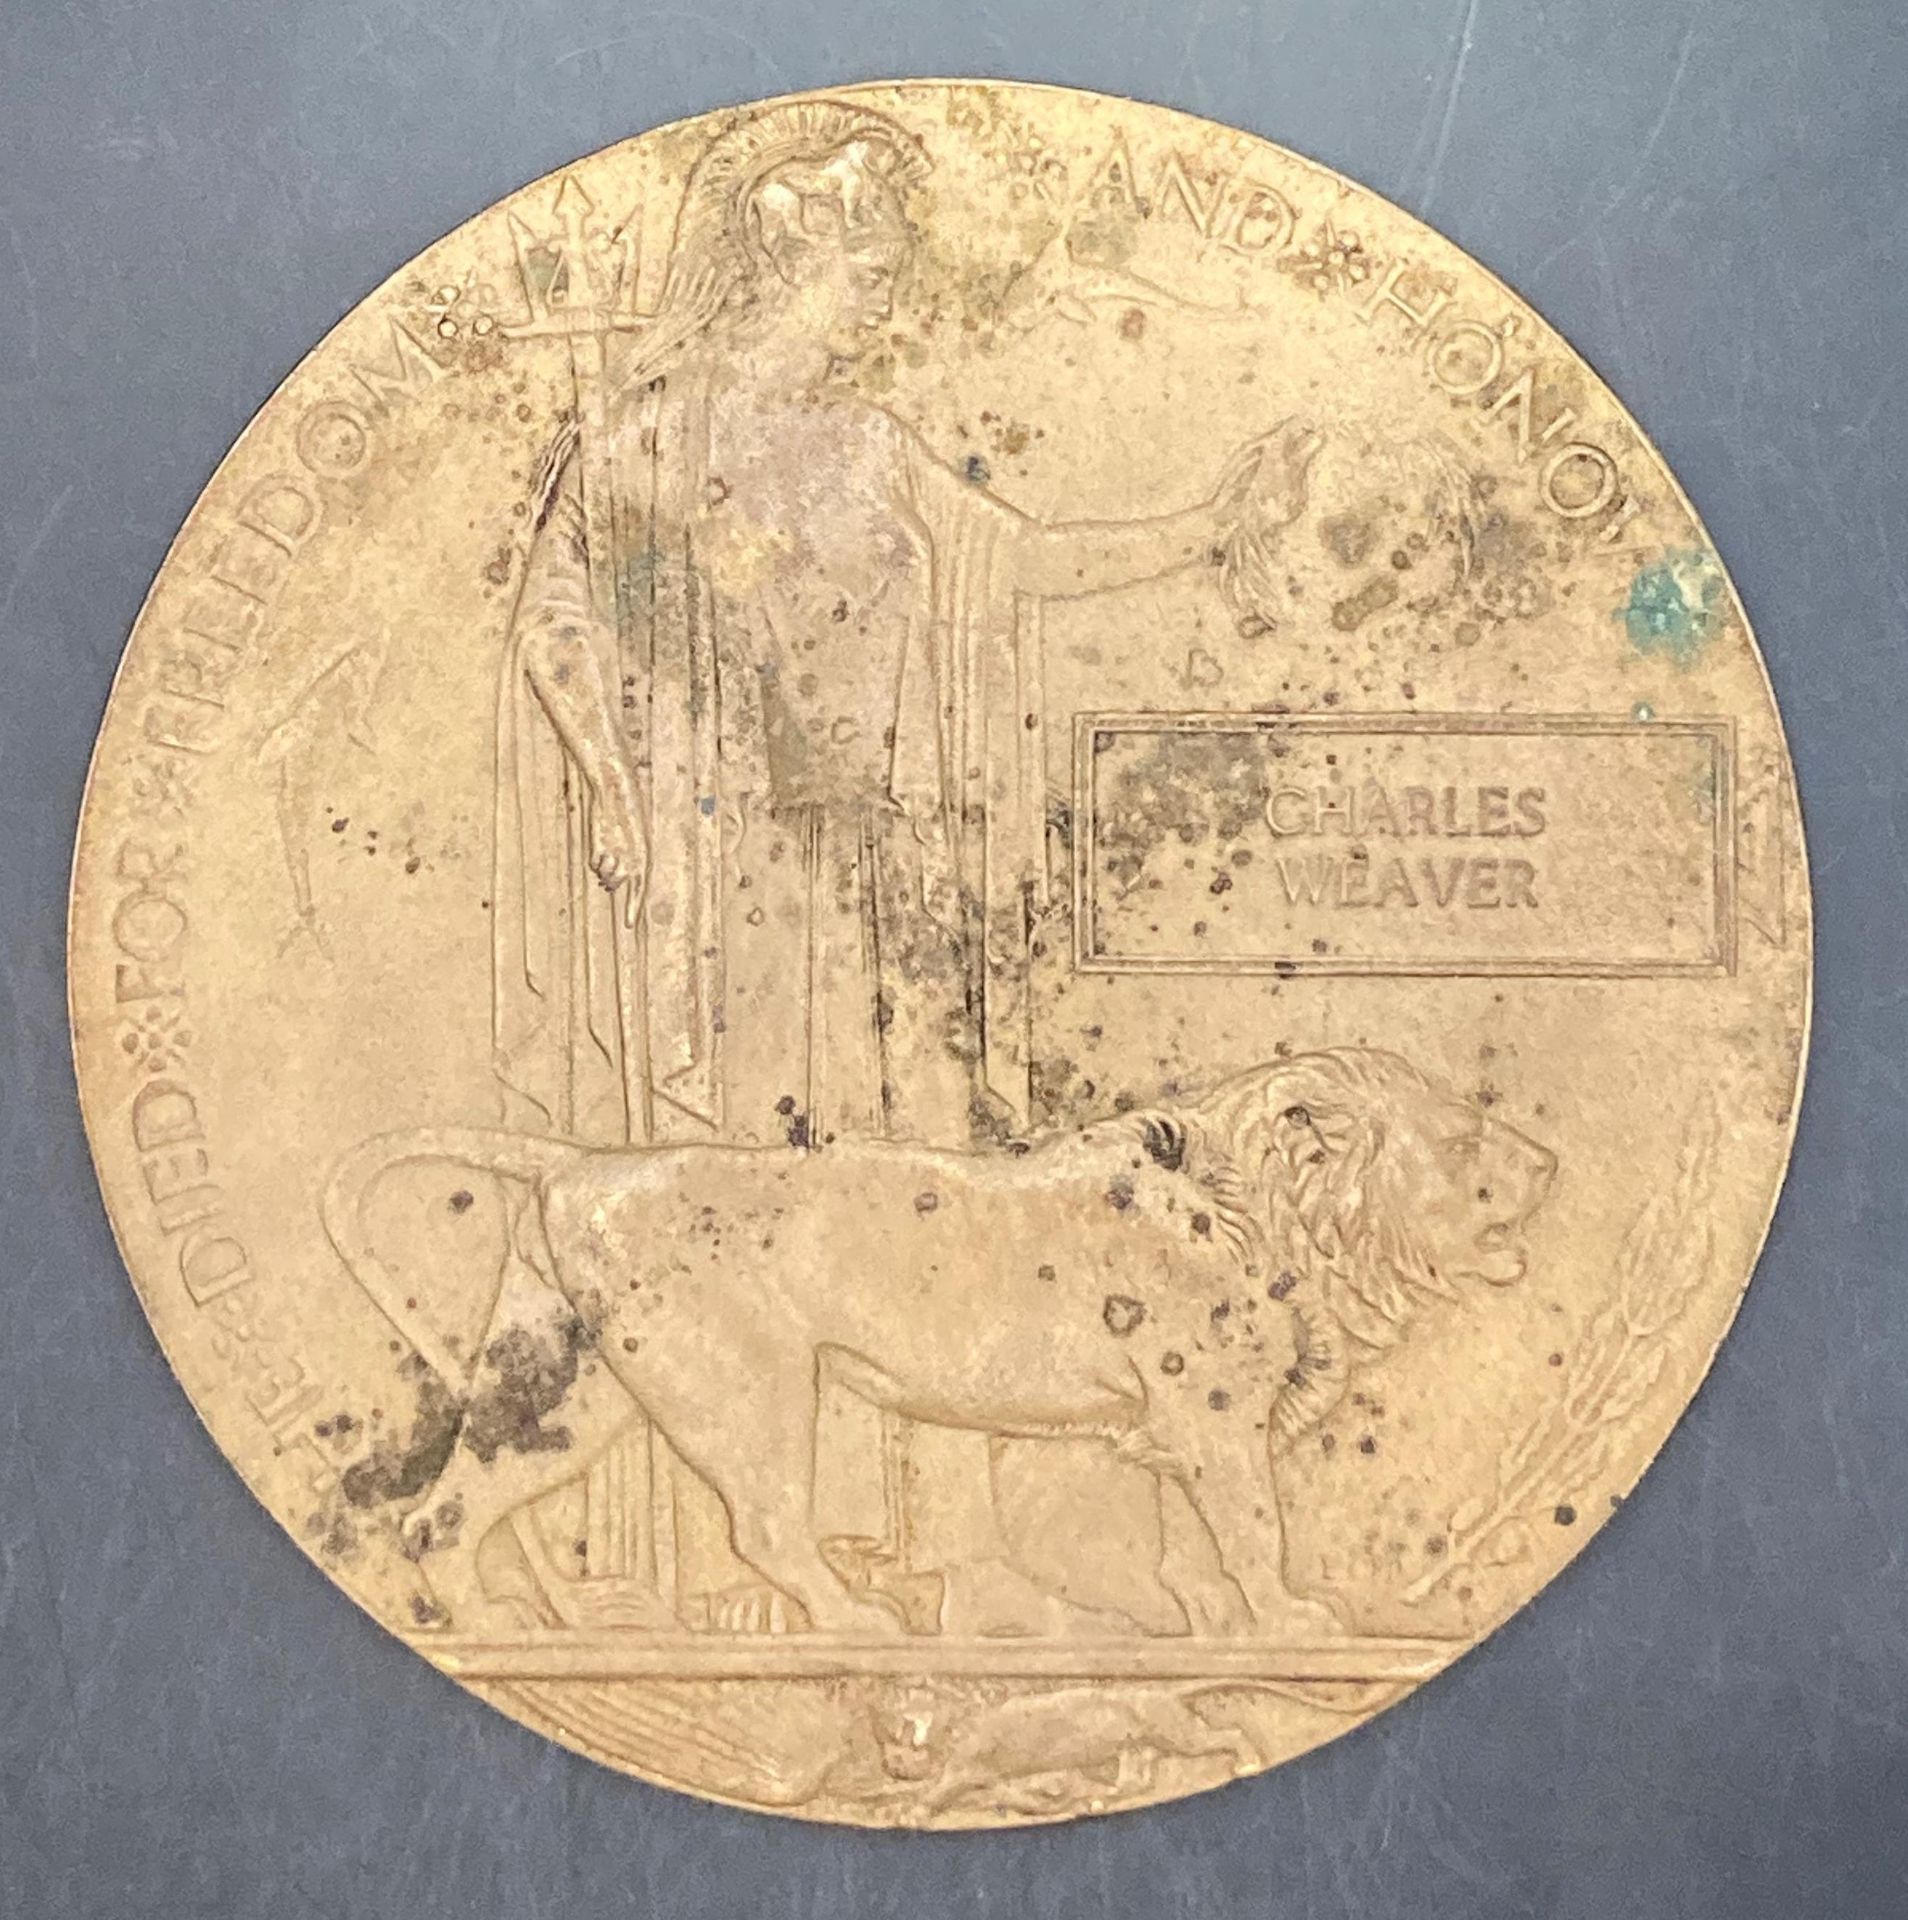 A bronze Death plaque awarded to Charles Weaver,